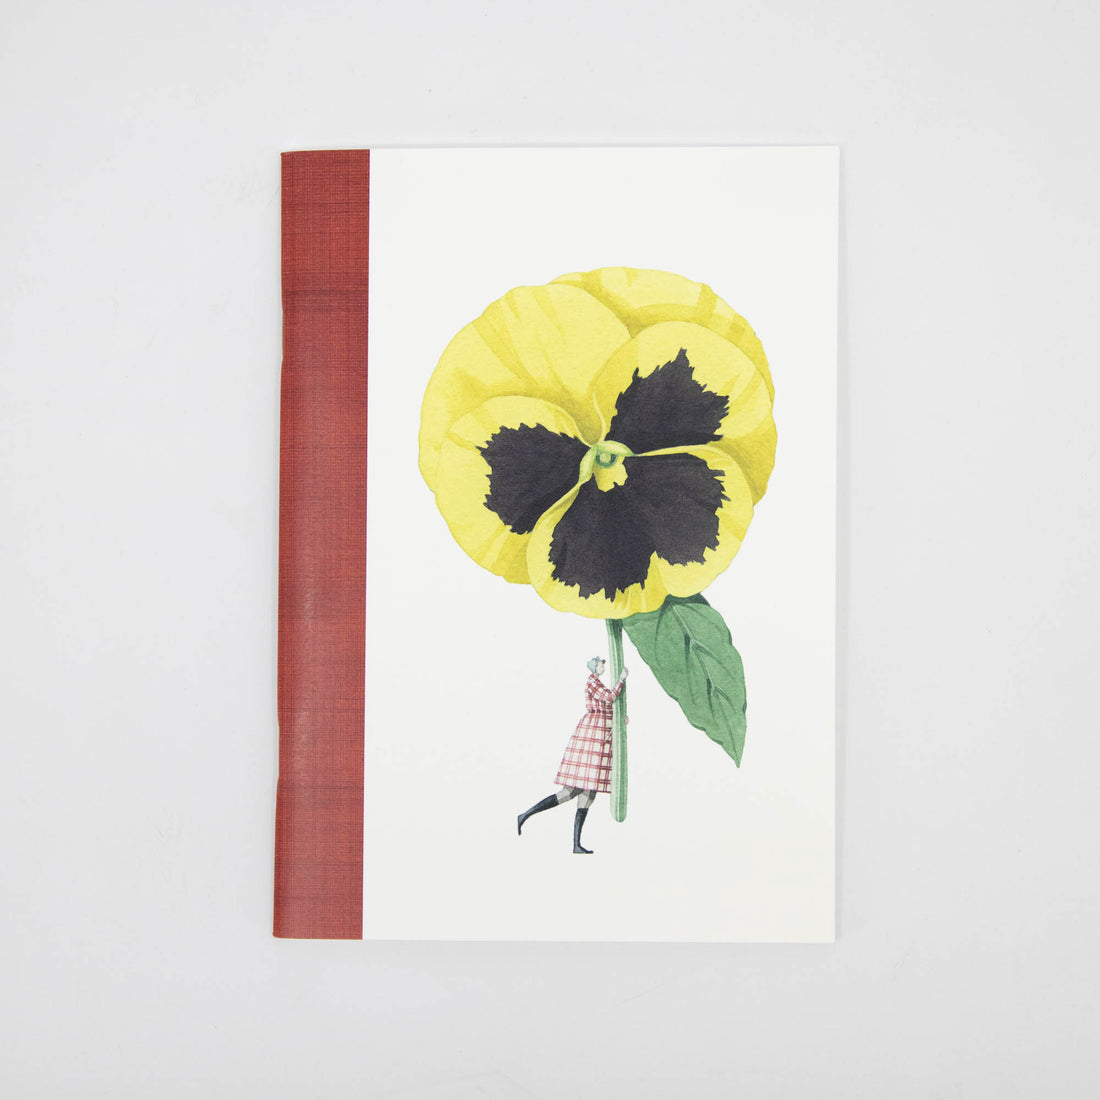 A Hester &amp; Cook In Bloom A5 Wire Stitched Notebook Pansy/Carnation with a creative cover design featuring a large illustrated yellow flower with a human figure integrated into the stem.